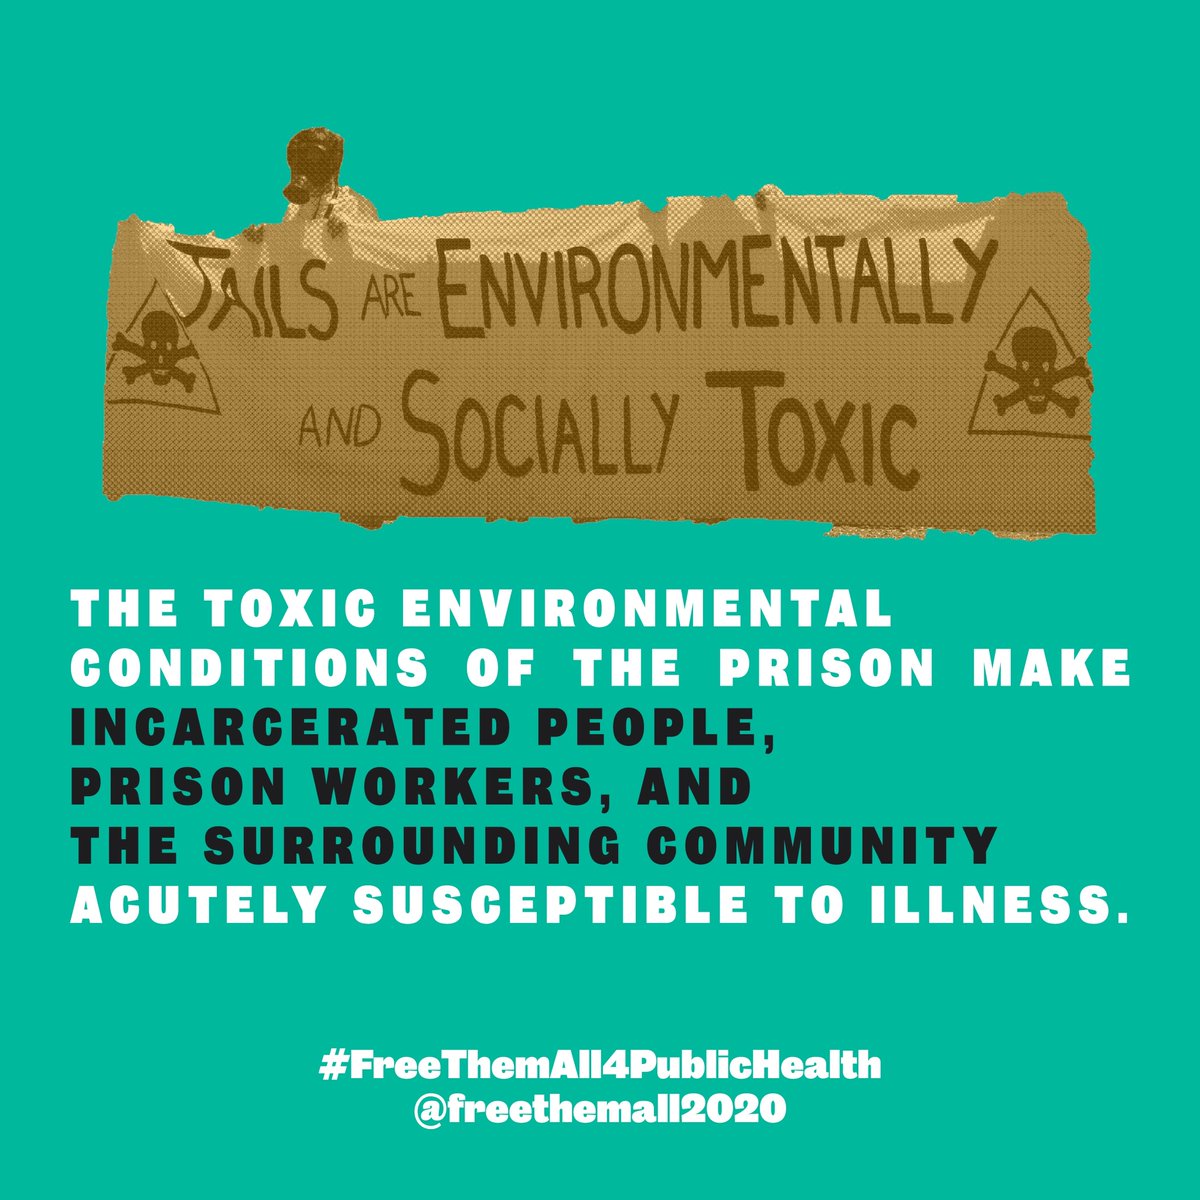 The toxic environmental conditions of the prison make incarcerated people, prison workers, and surrounding communities acutely more susceptible to illness.